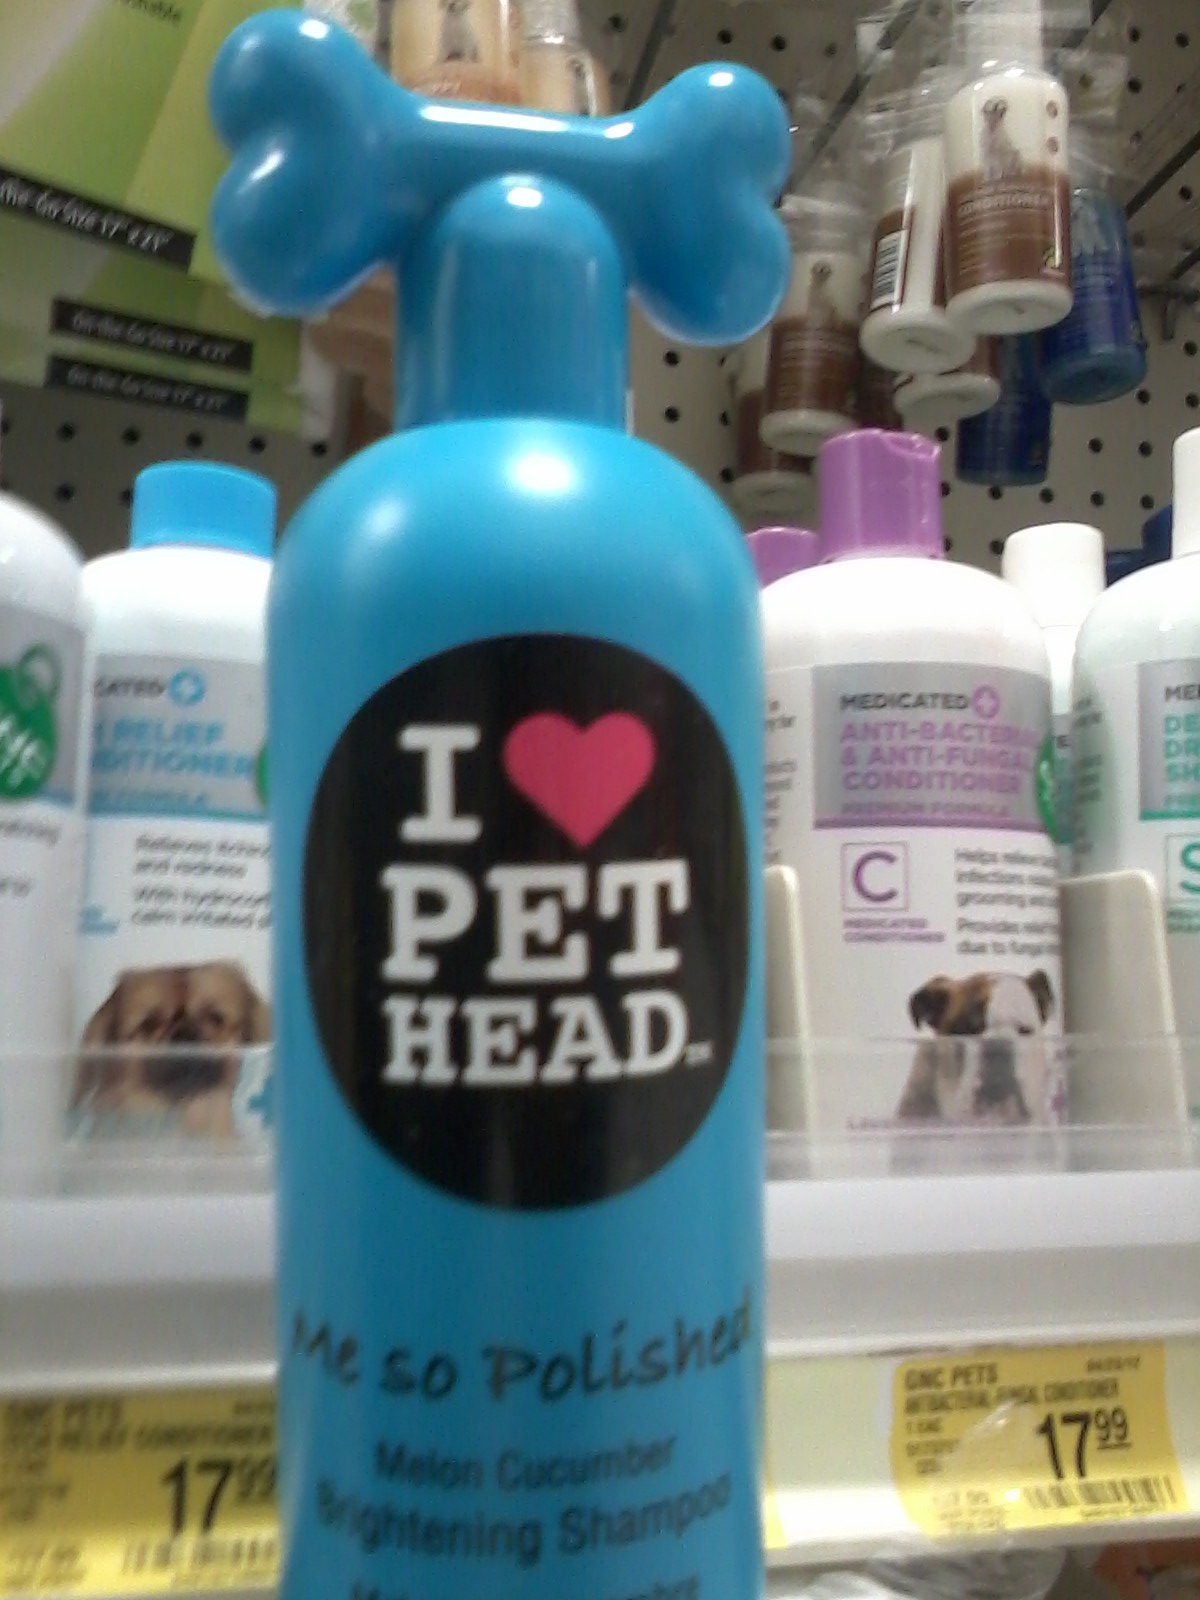 A pet care product for the freak in you.